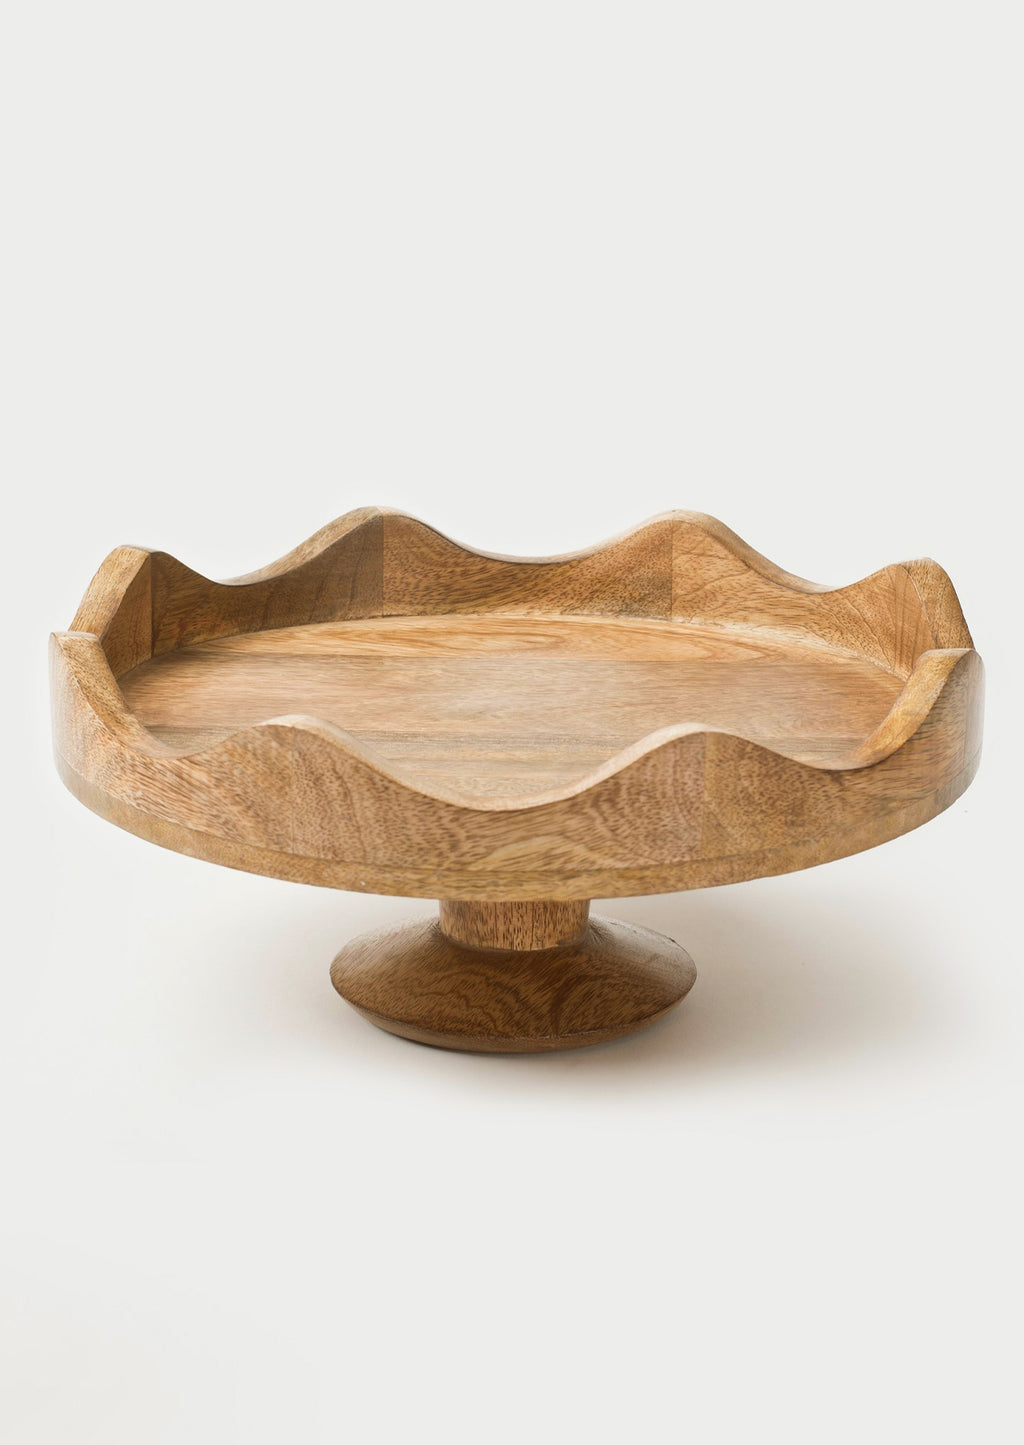 1: A mango wood cake stand with scalloped wavy edges.